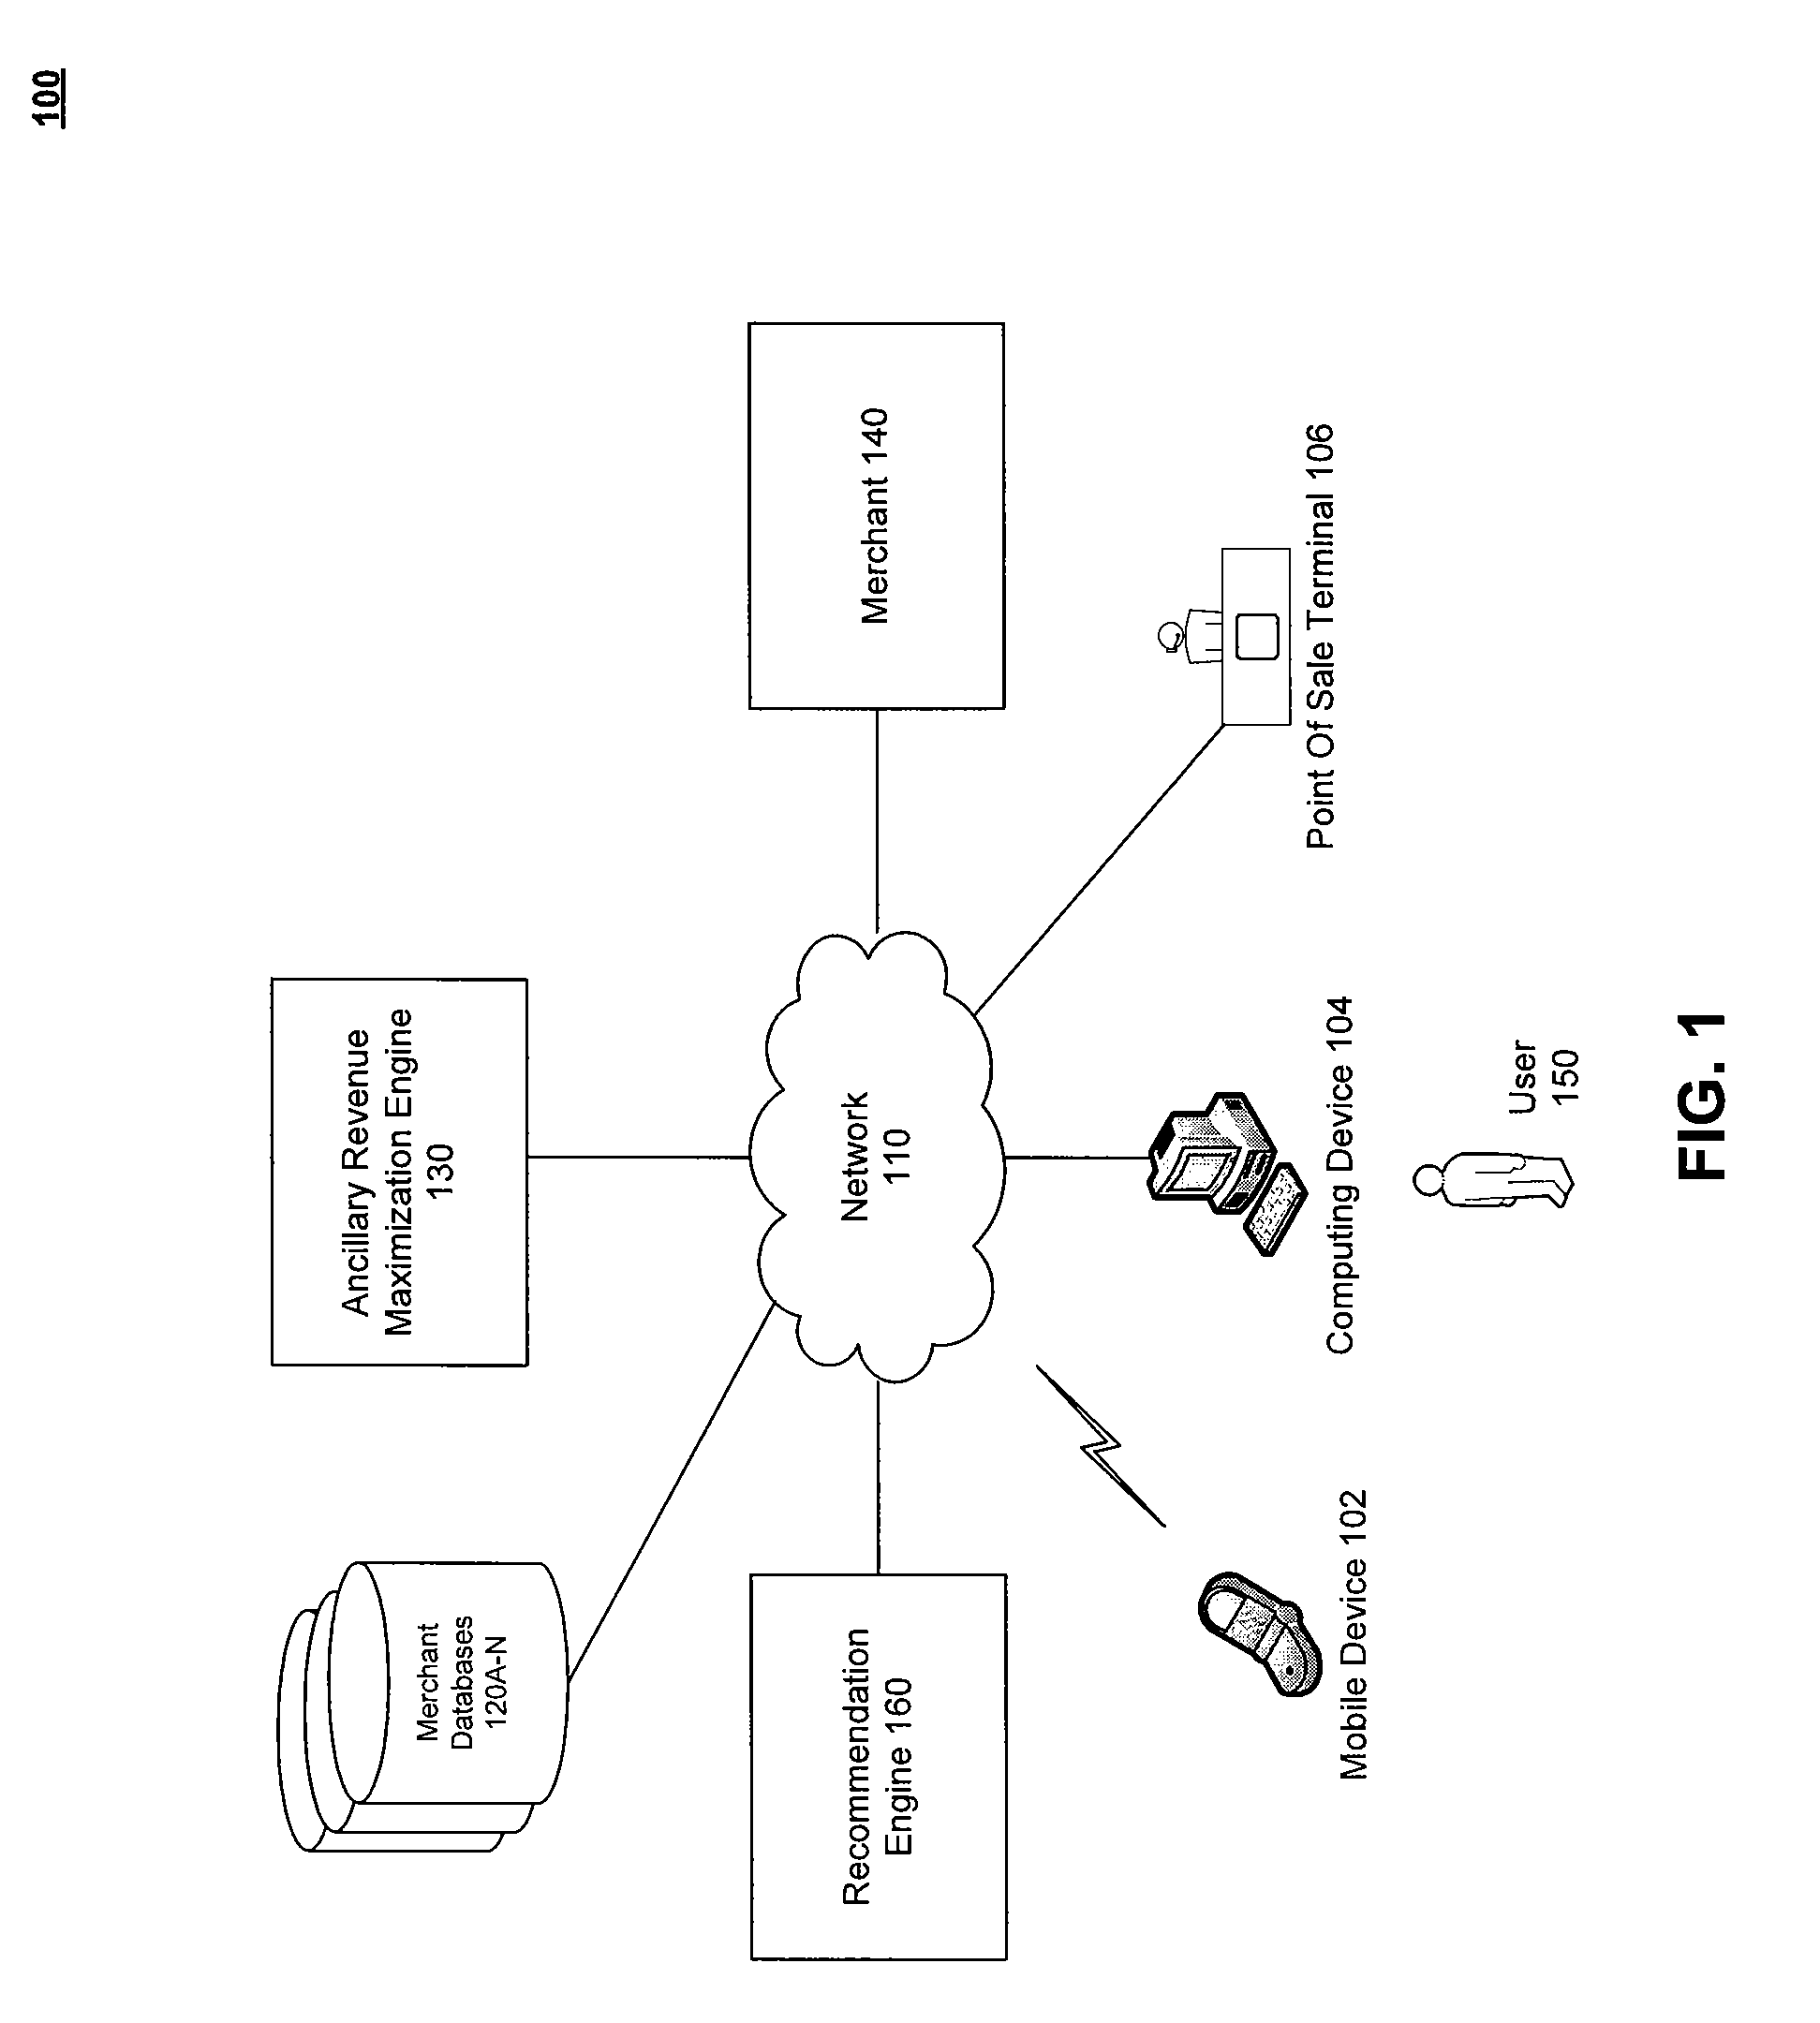 Integrated Real-Time Ancillary Revenue Optimization System